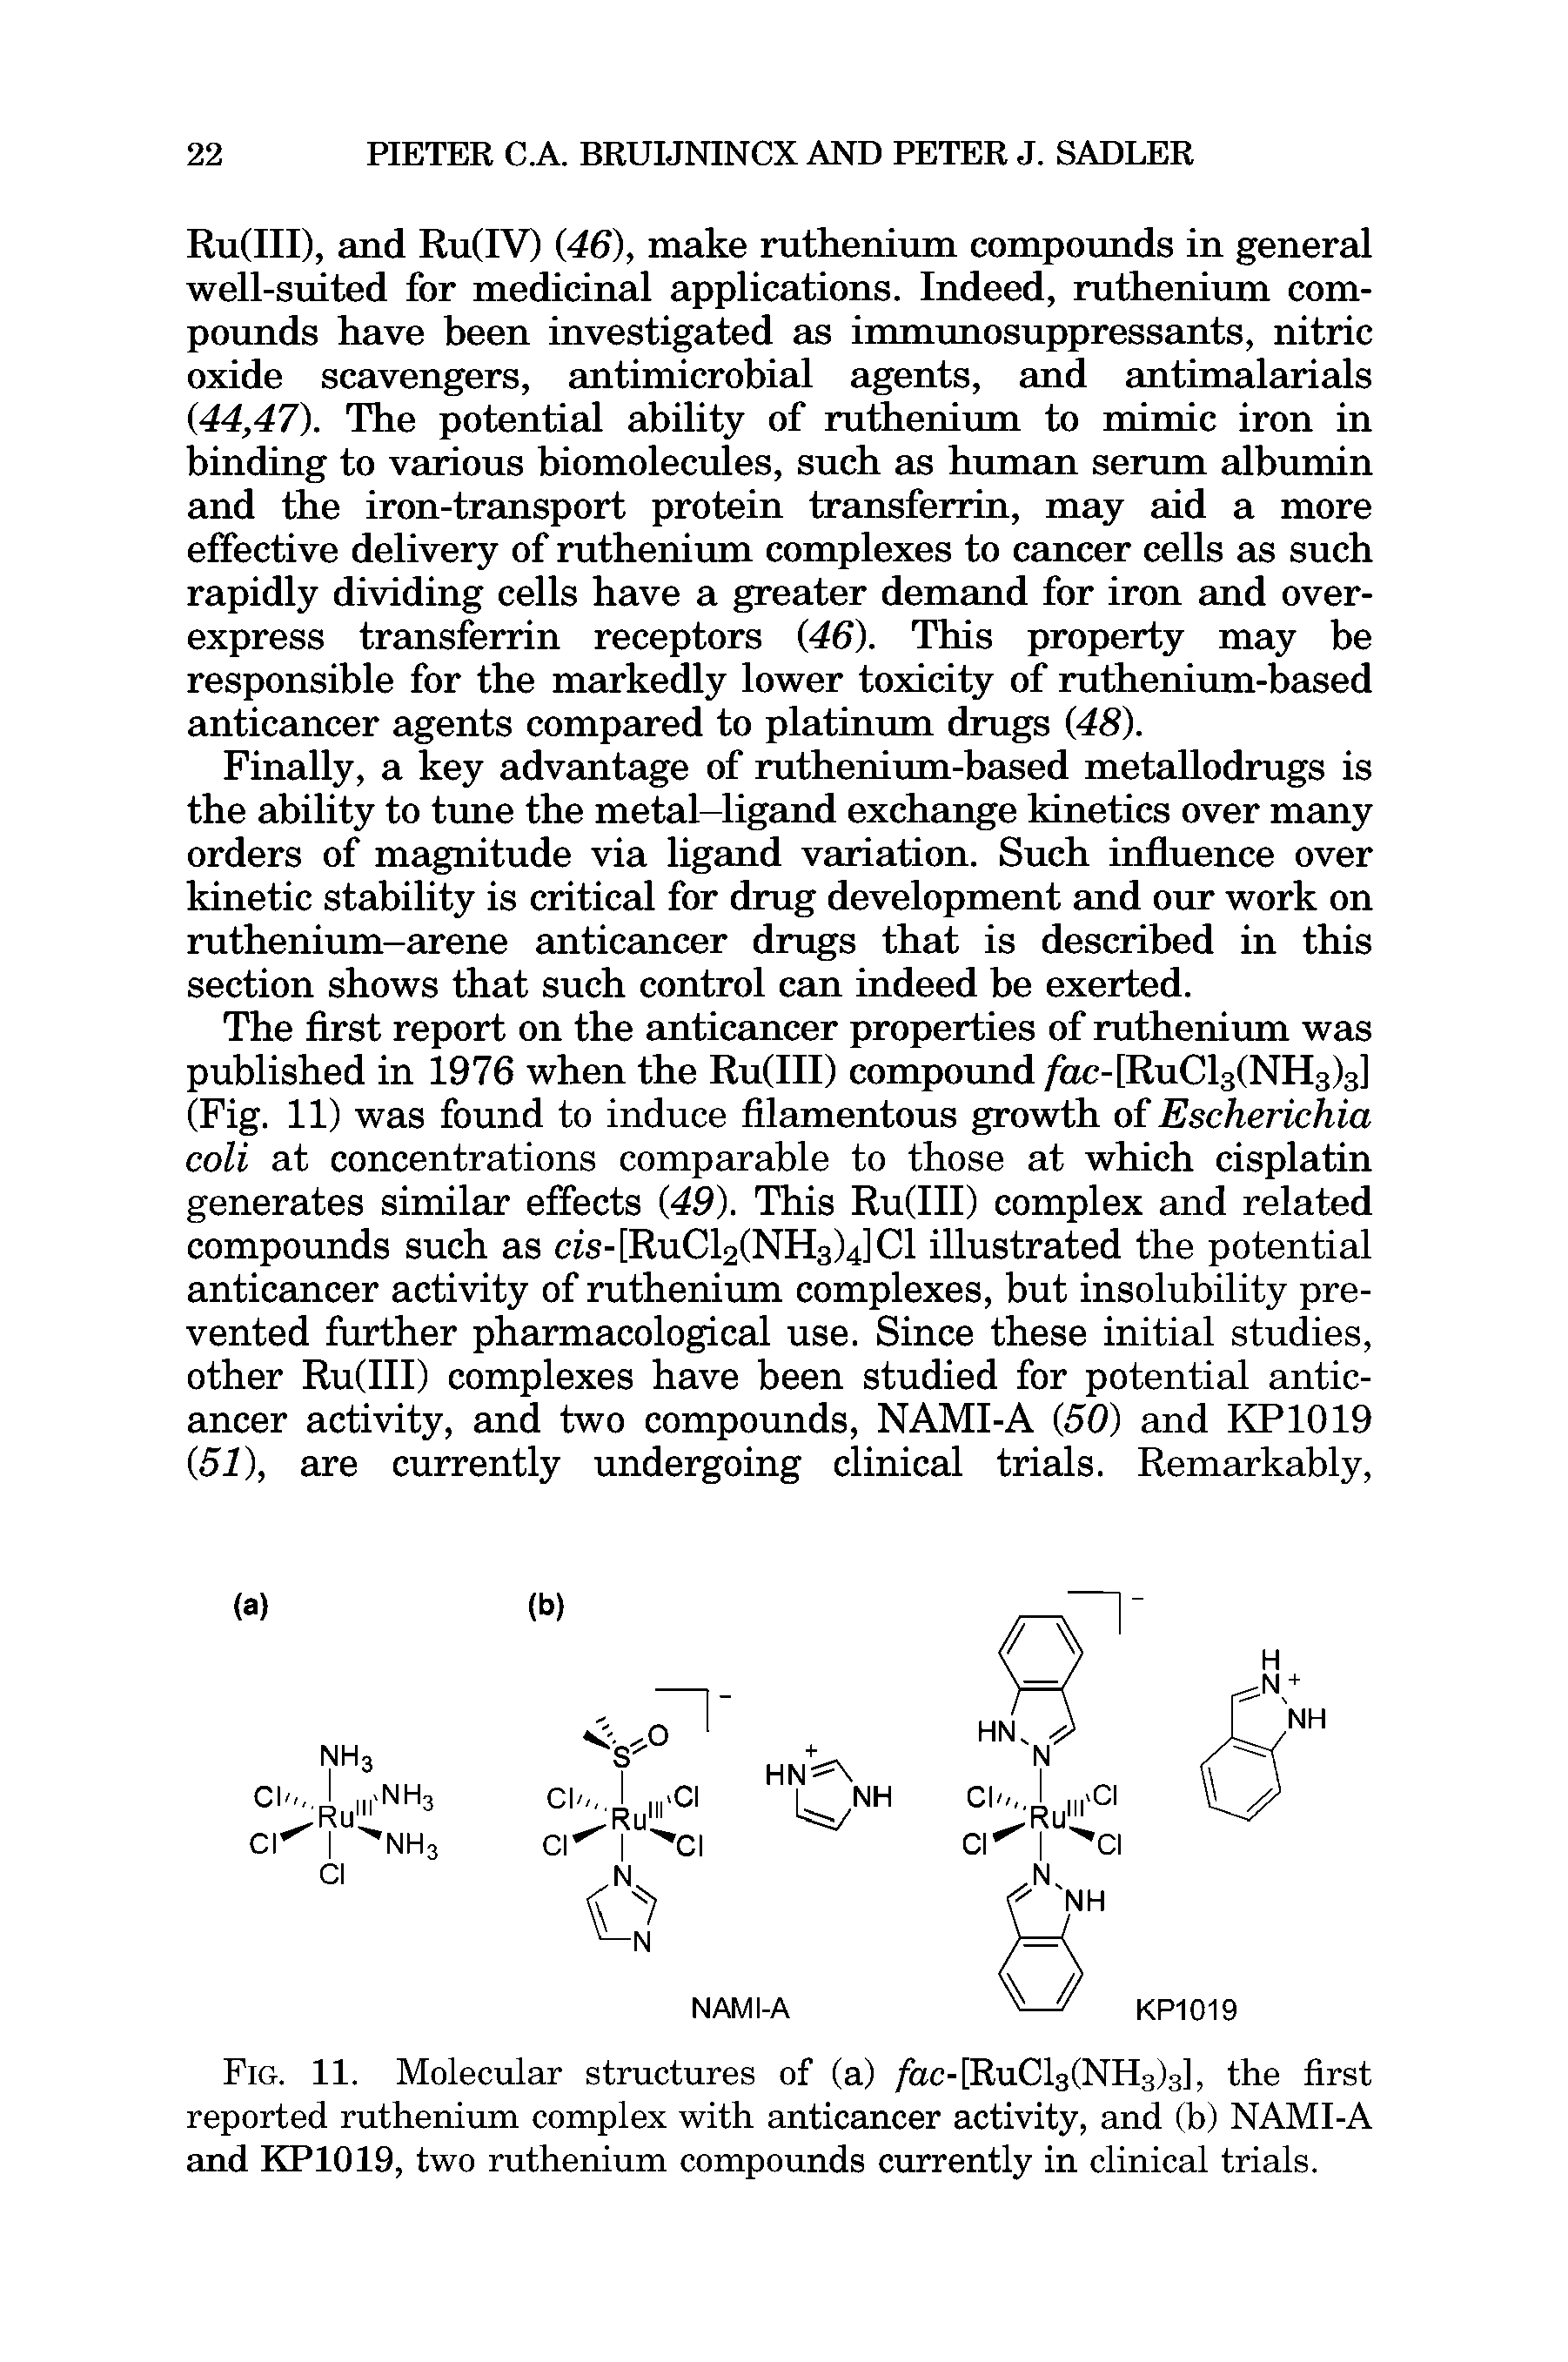 Fig. 11. Molecular structures of (a) fac-[RuCl3(NH3)3], the first reported ruthenium complex with anticancer activity, and (b) NAMI-A and KP1019, two ruthenium compounds currently in clinical trials.